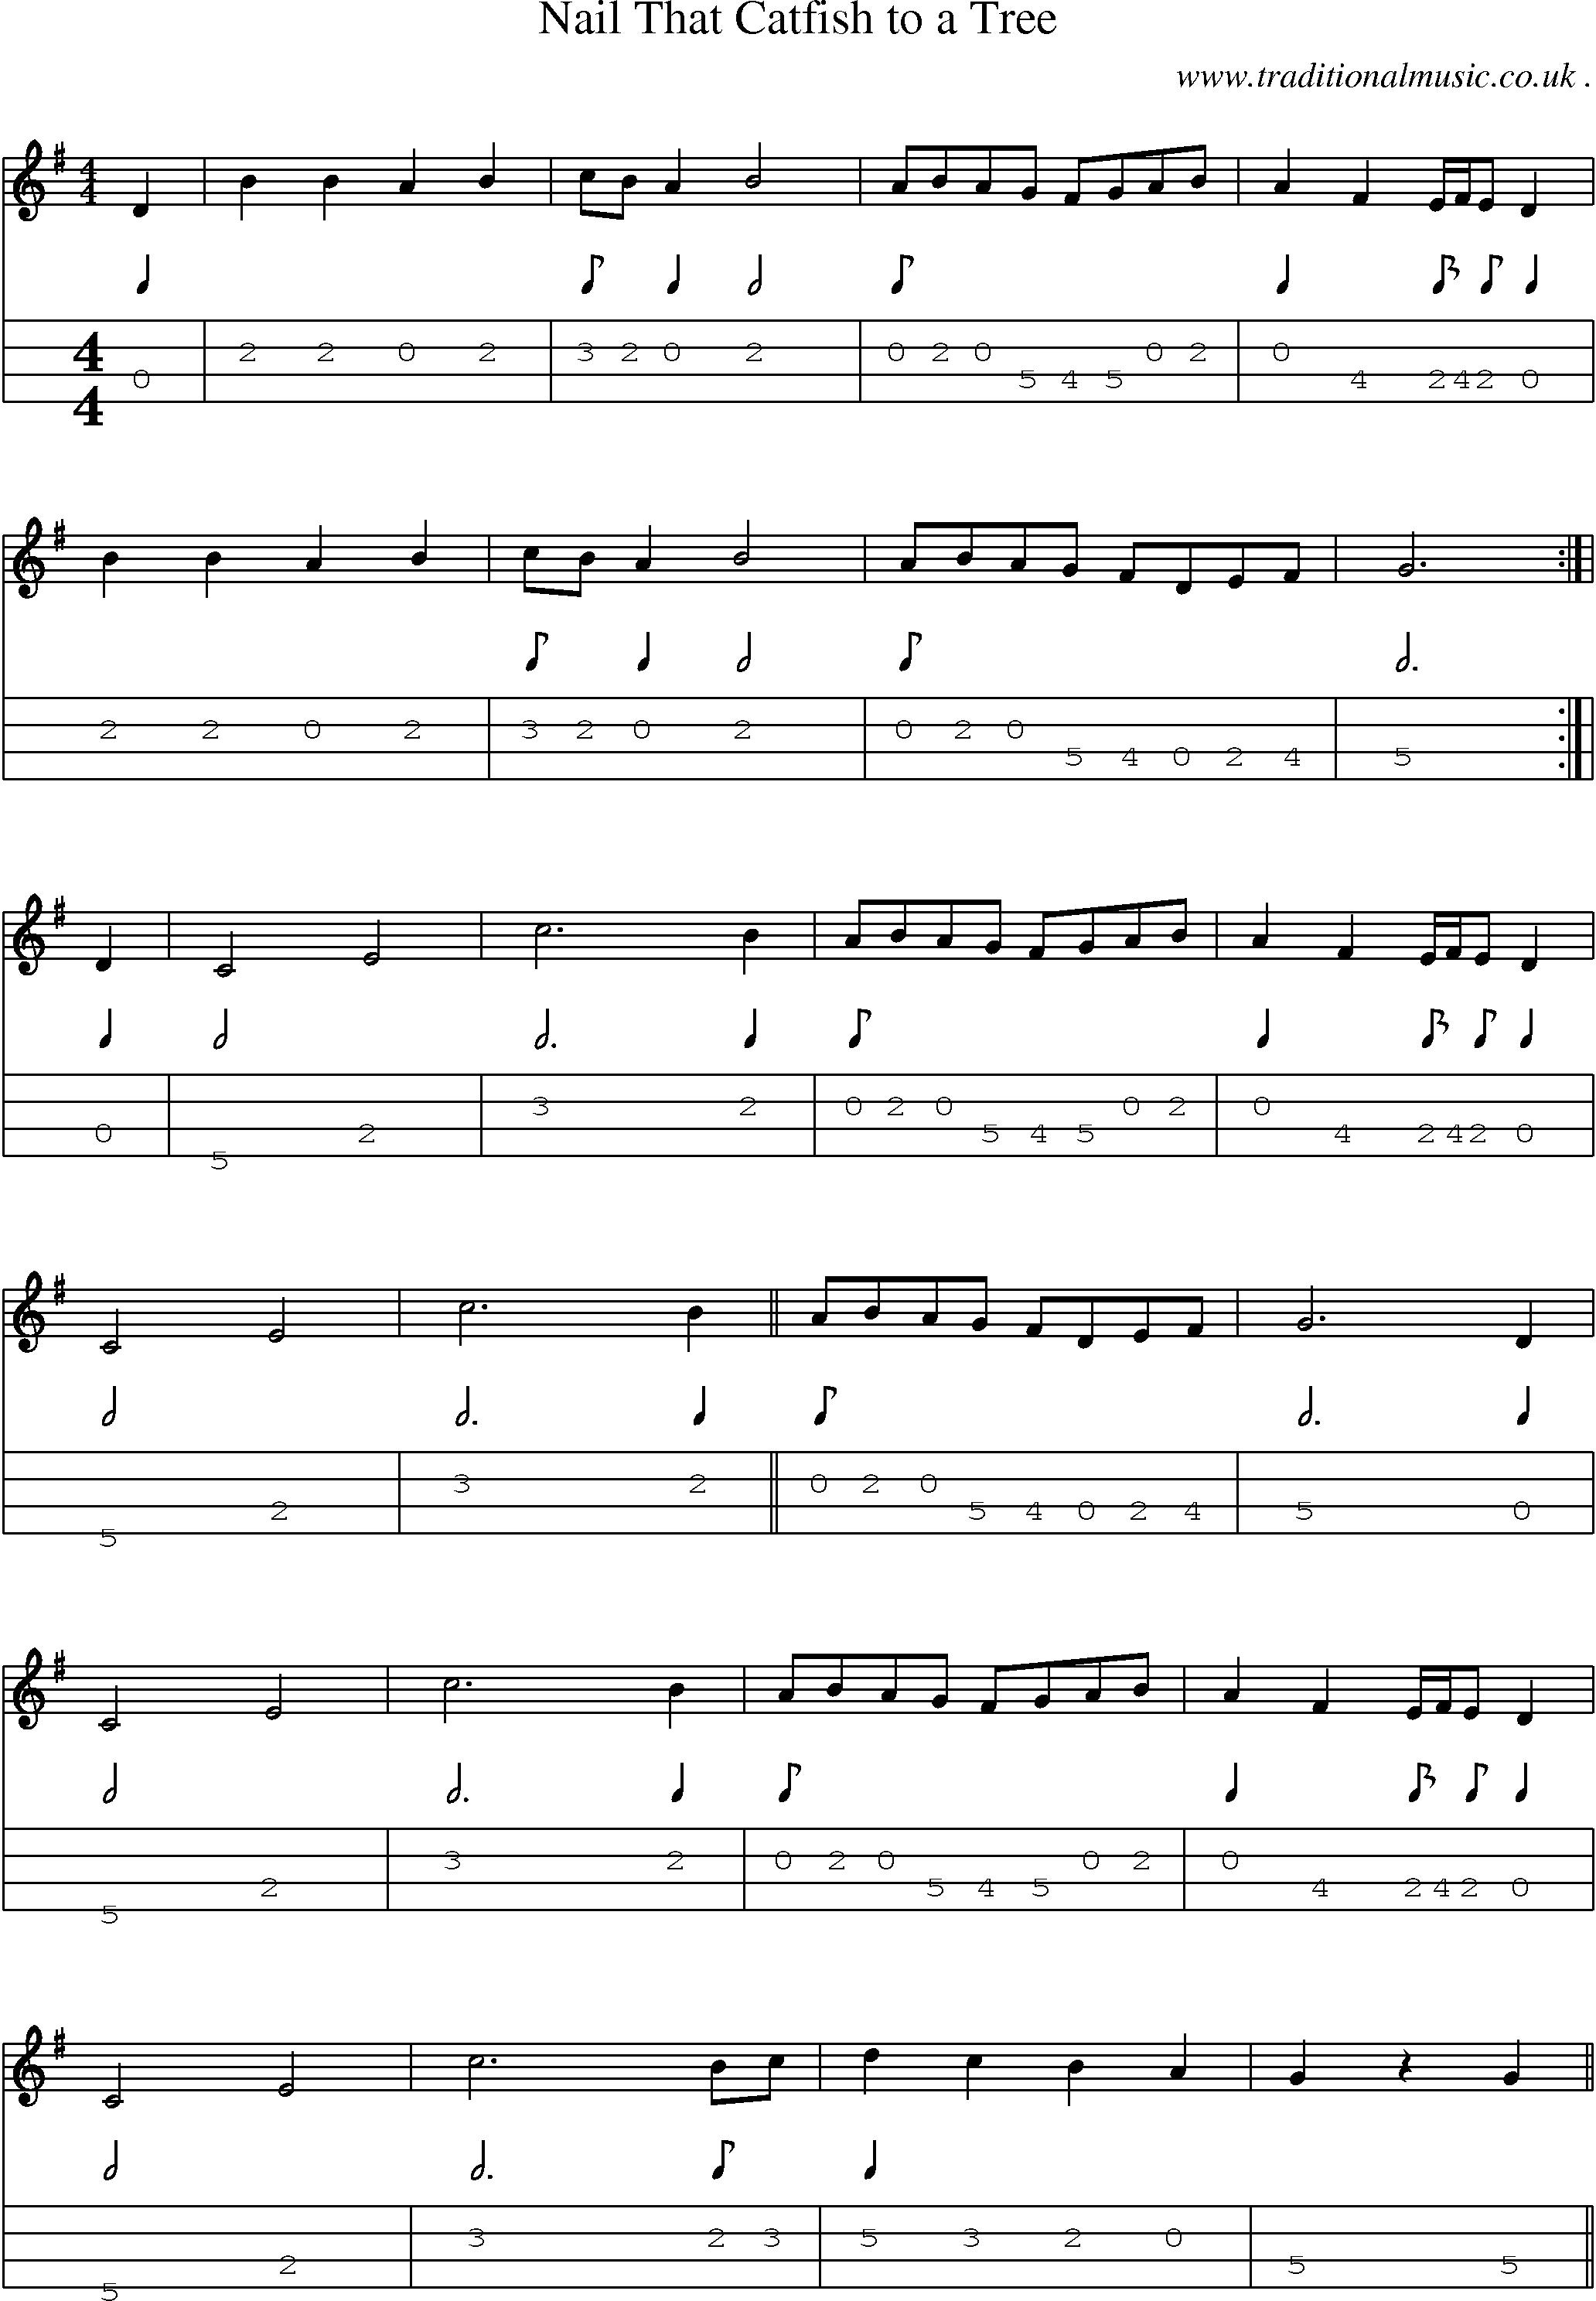 Sheet-Music and Mandolin Tabs for Nail That Catfish To A Tree